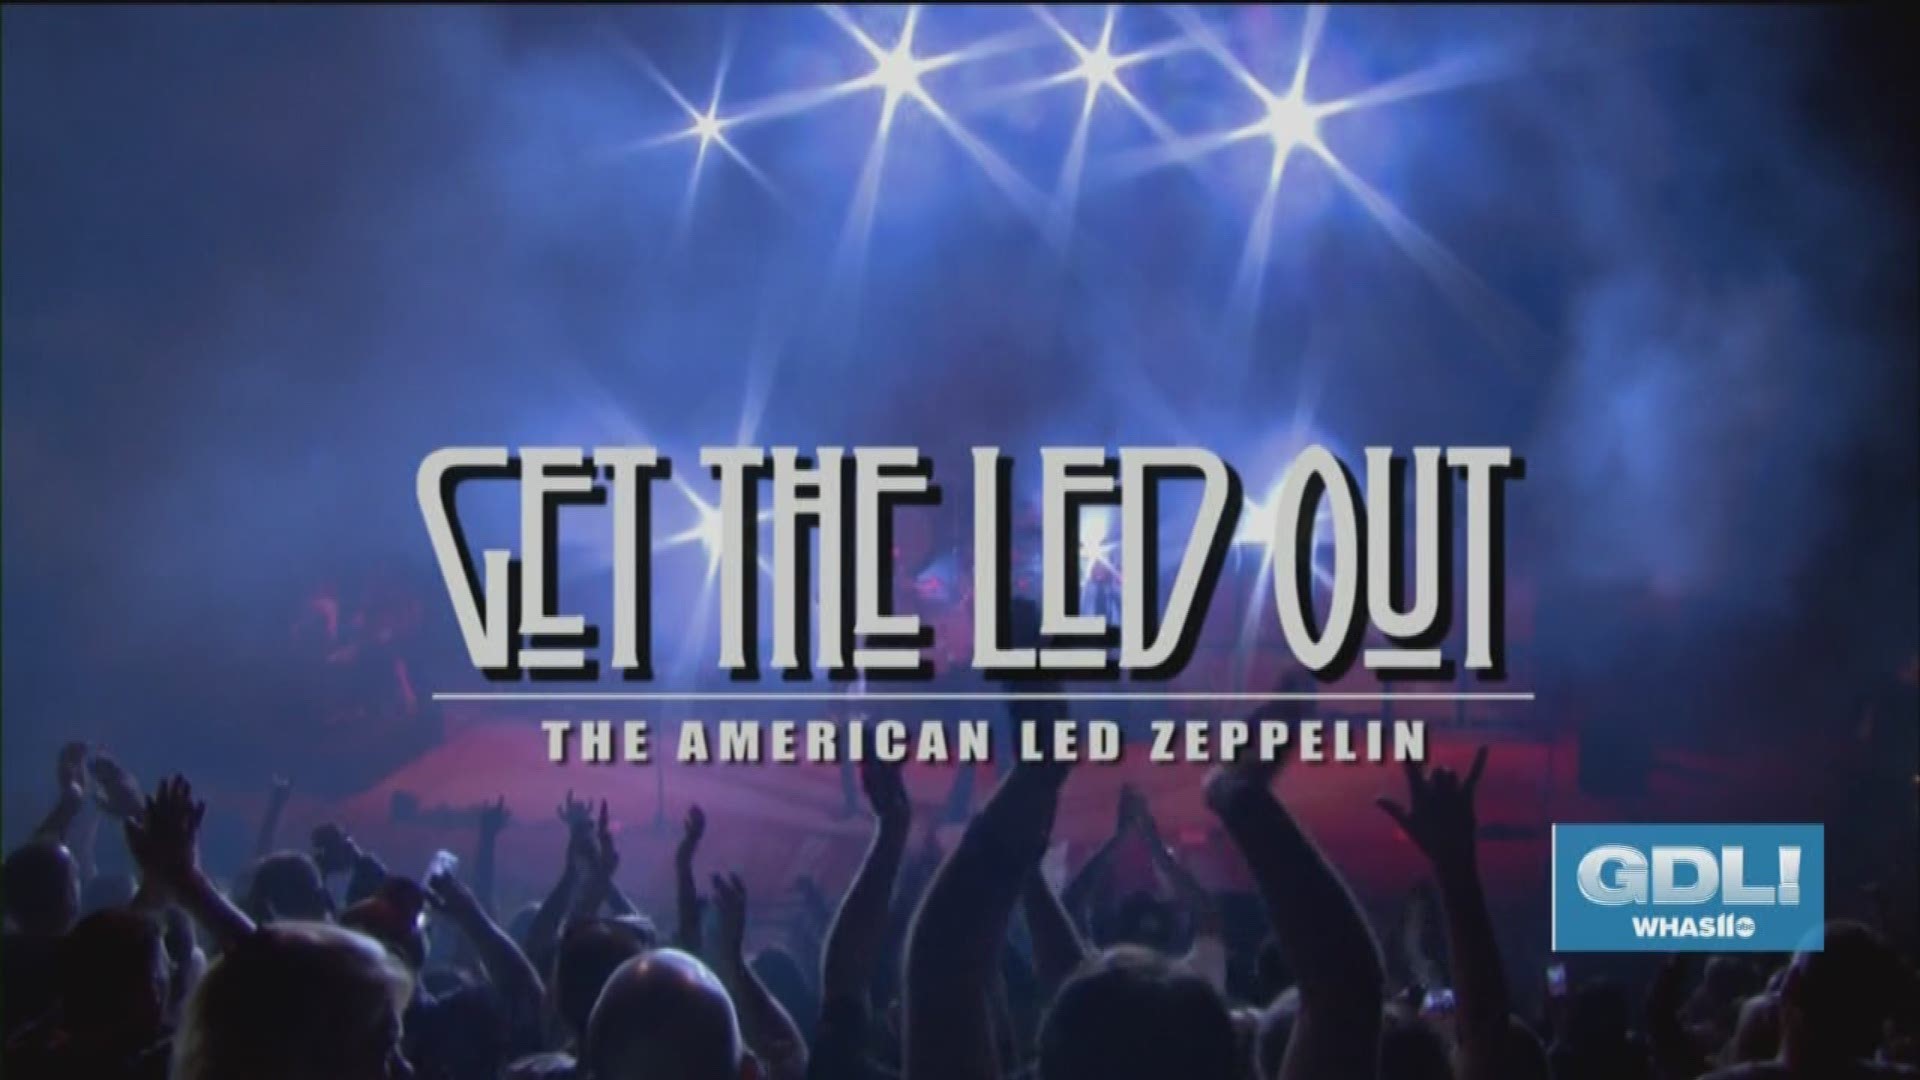 With a Led Zeppelin tribute band in town to play a show, we enlisted our Great Day Live Led Zeppelin expert, Bryce Gill, to break down a few artists, past and present, who added Zepp to their step to climb the stairway to success.